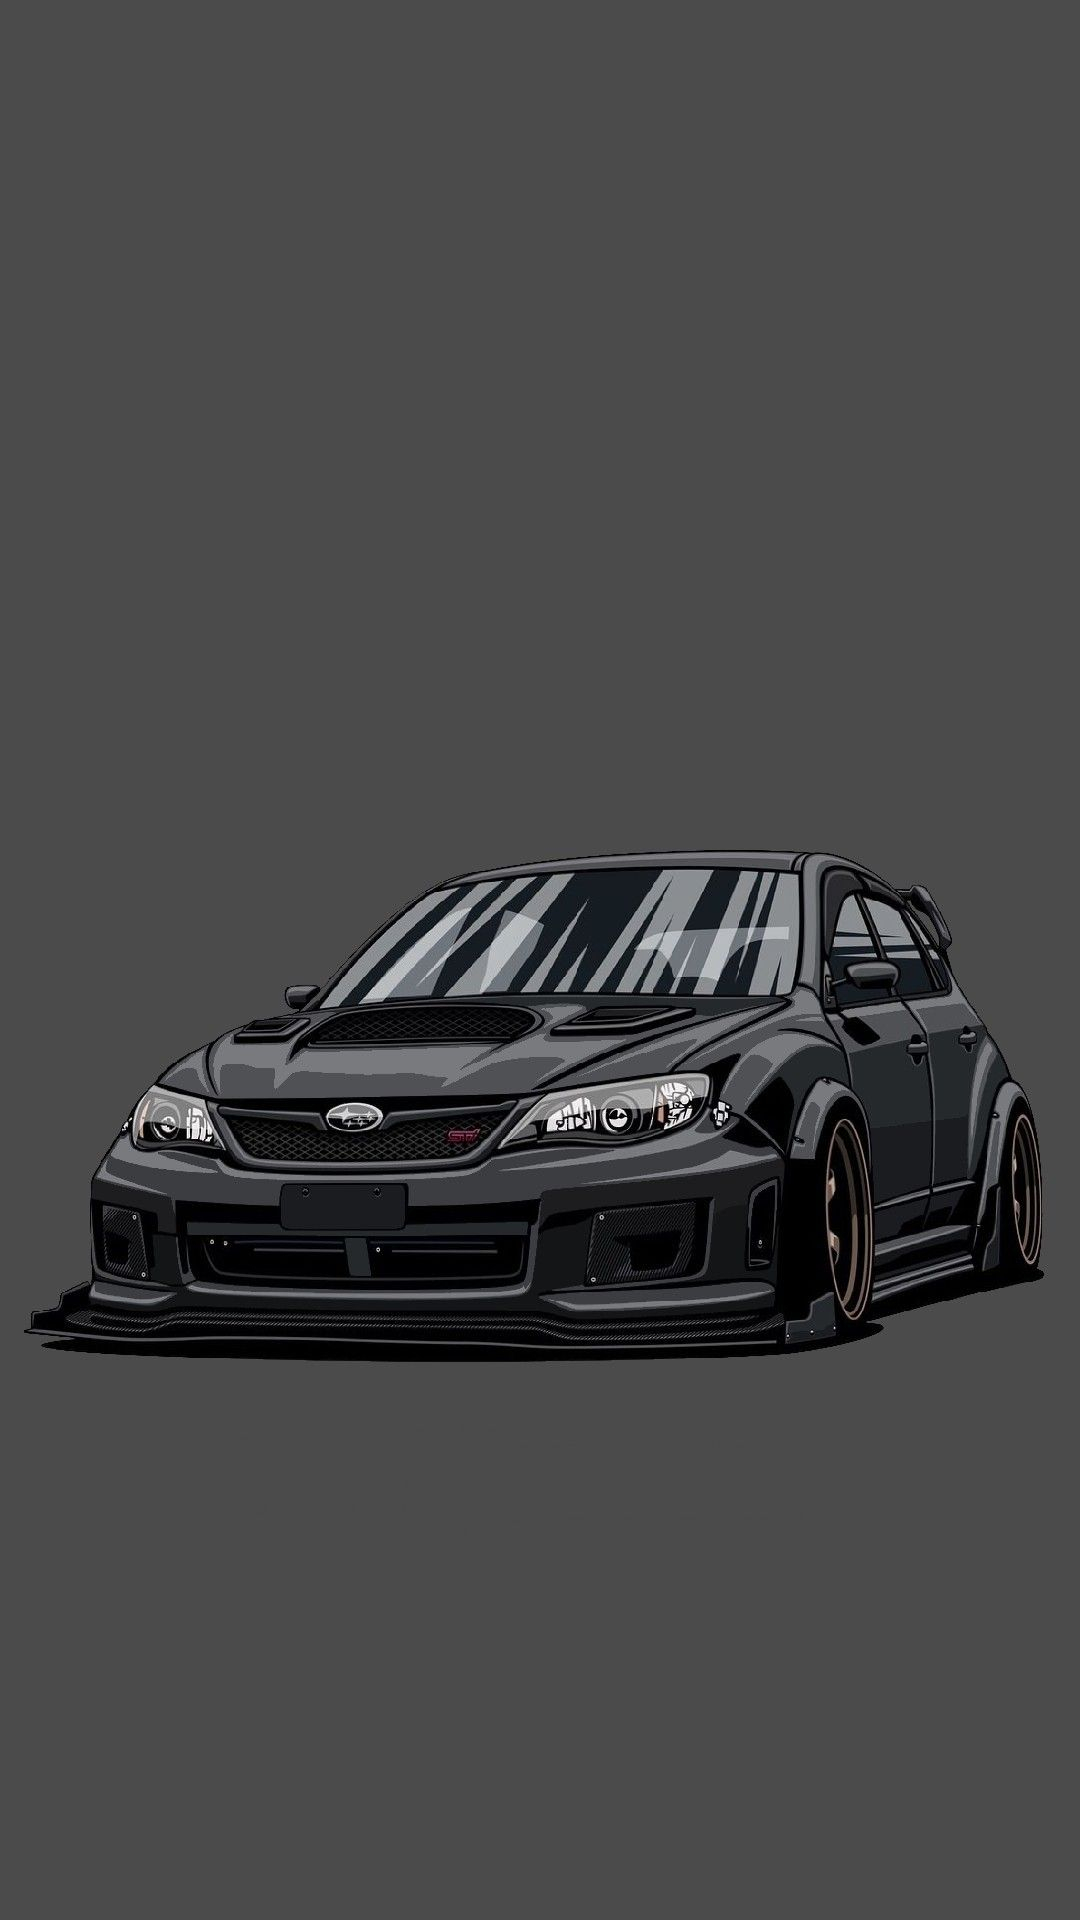 1080x1920 Pin by Eugene on Illustrations | Subaru cars, Car wallpapers, Jdm cars